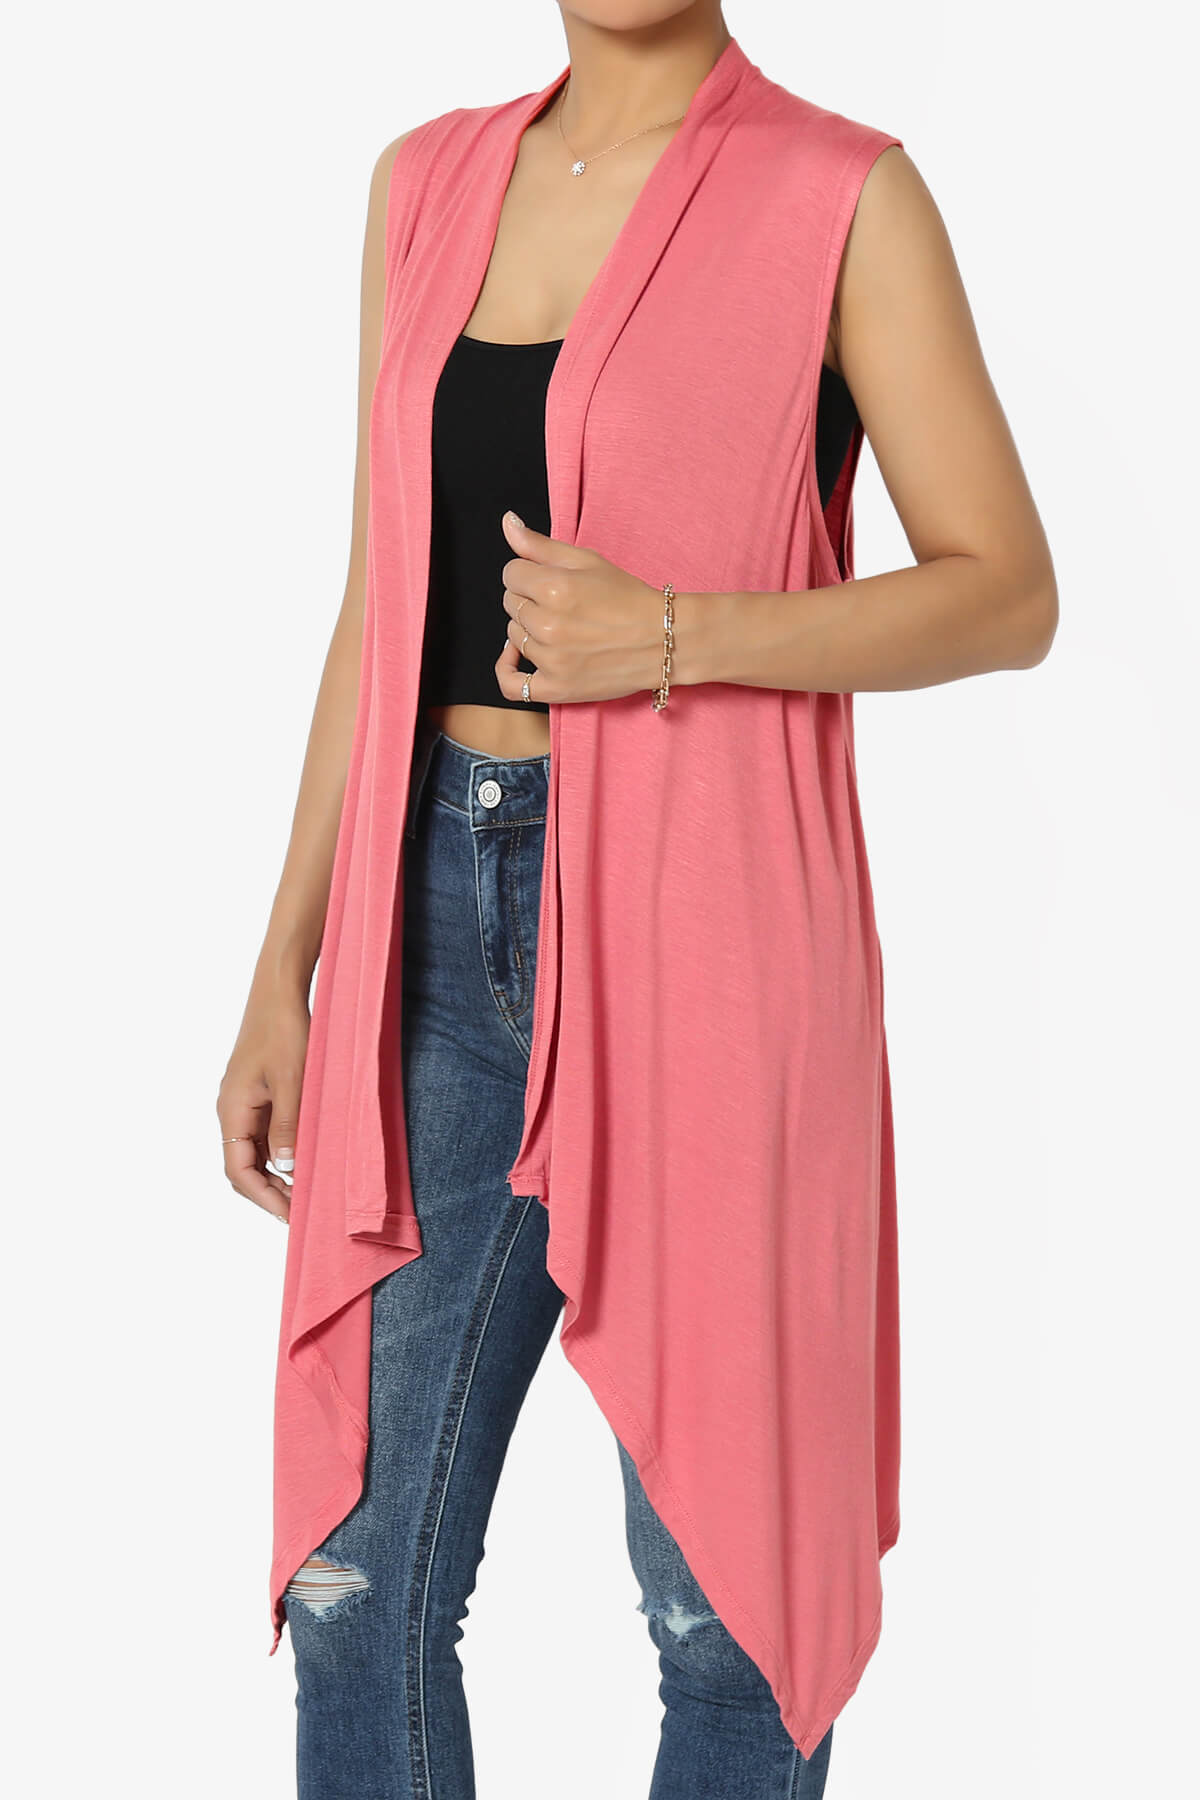 Load image into Gallery viewer, Taysom Draped Open Front Sleeveless Cardigan Vest DESERT ROSE_3
